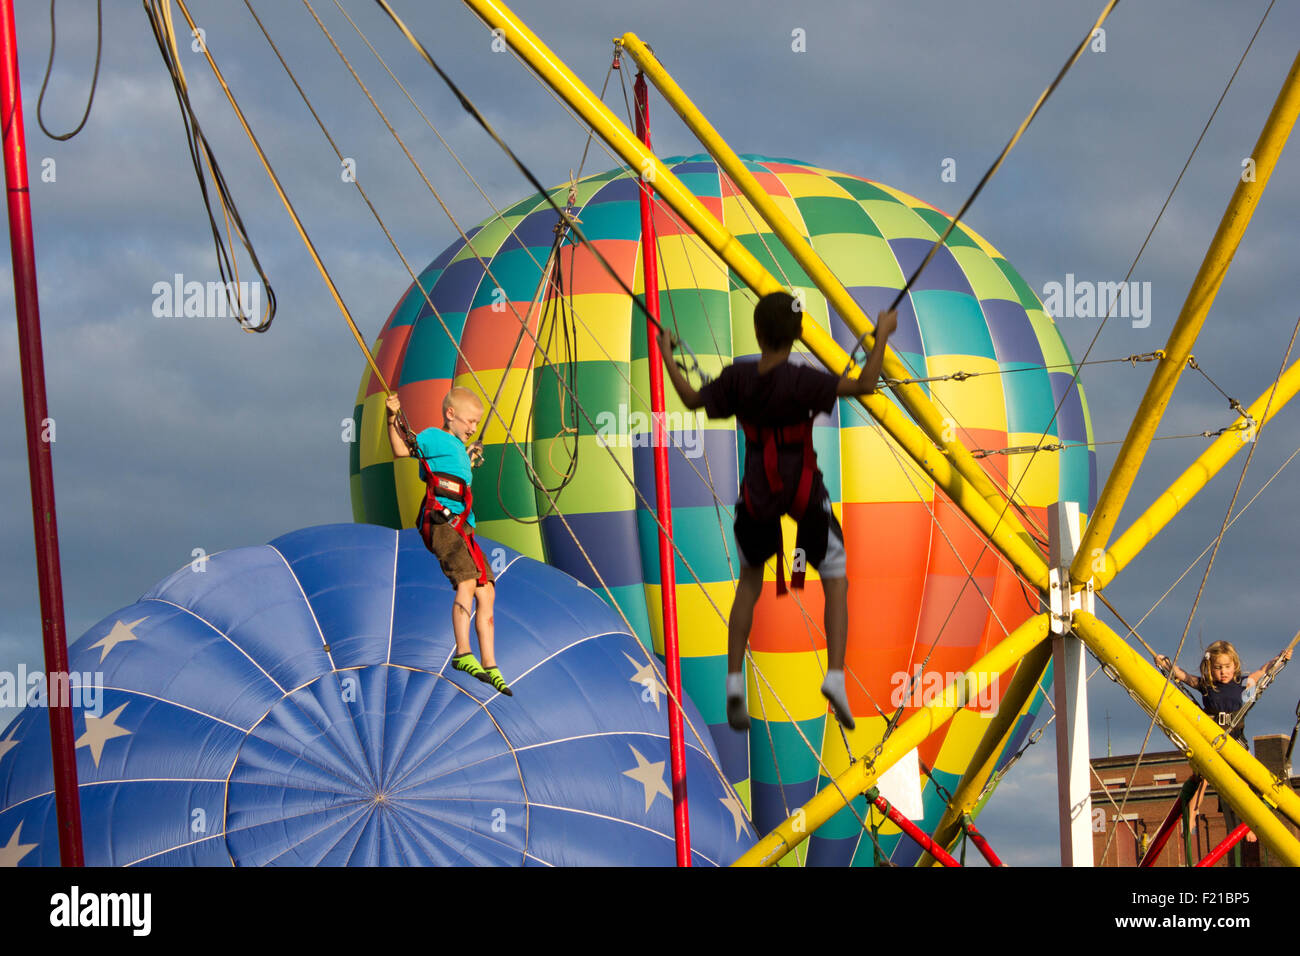 Hot air balloons launch as children play on bungees in the foreground.  Summer festival in Lewiston, Maine USA. Stock Photo